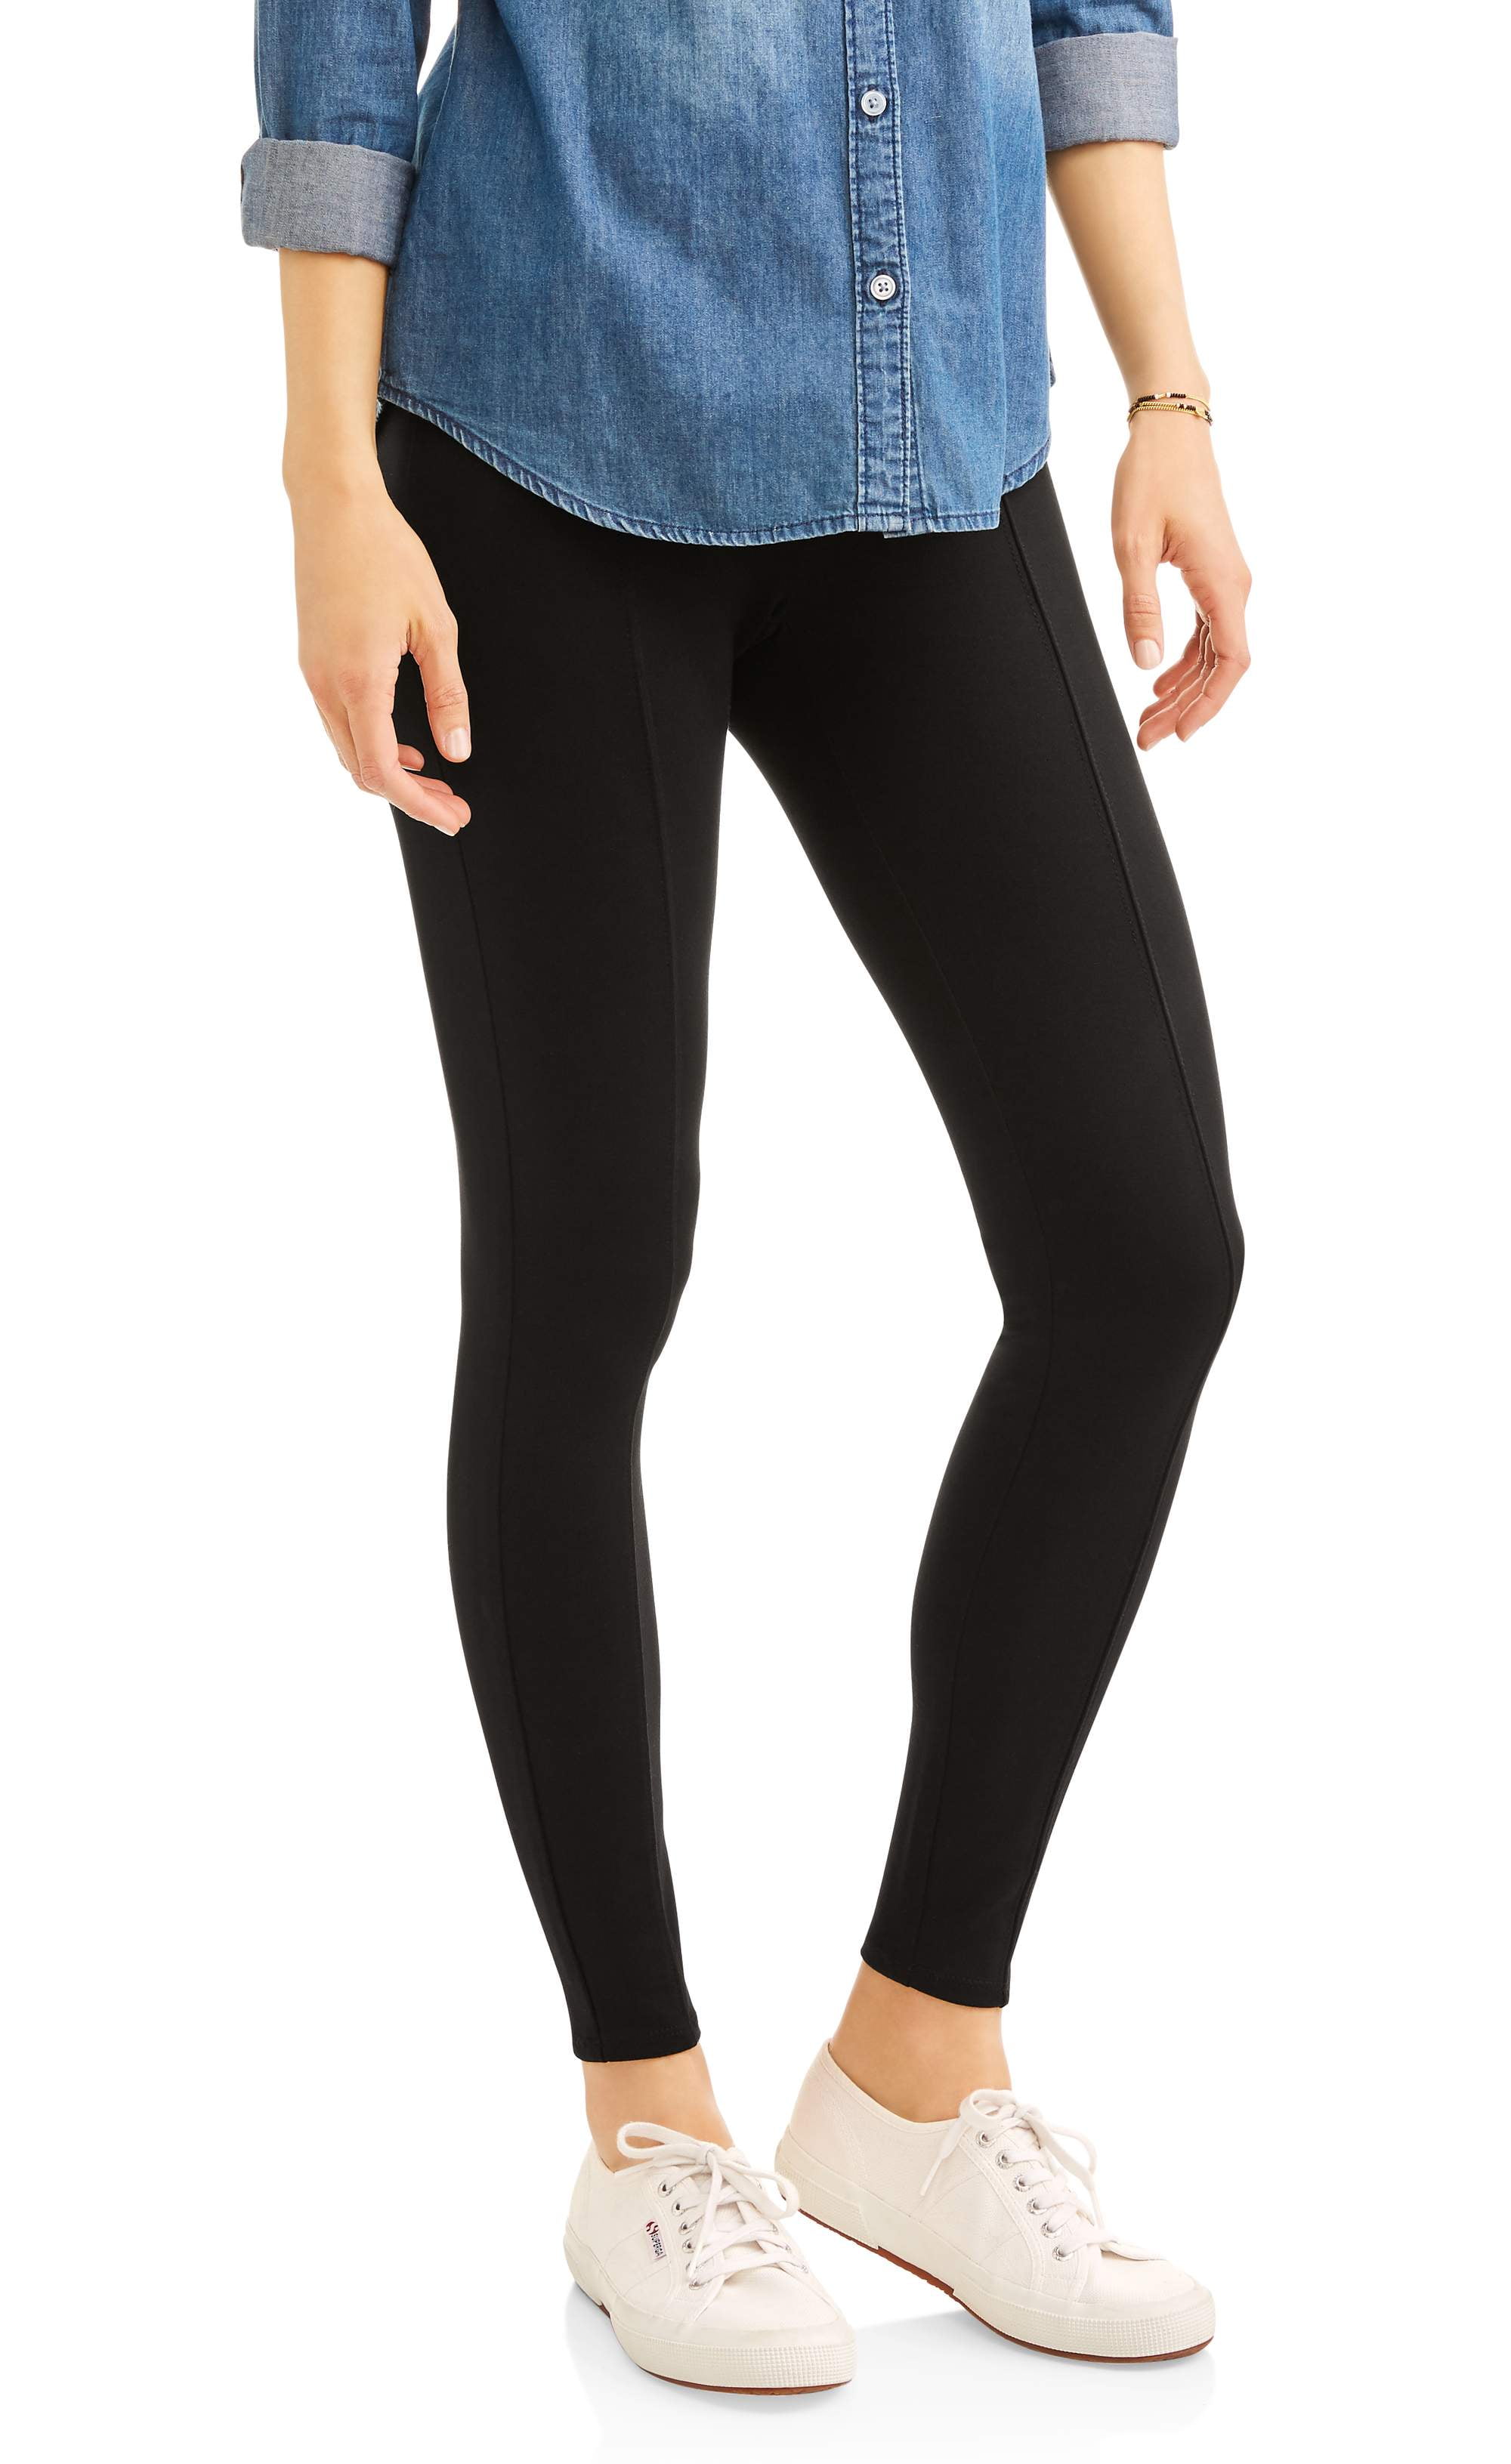 Faded Glory Blue/Black Leopard Stretch Cotton Ankle Length Leggings 